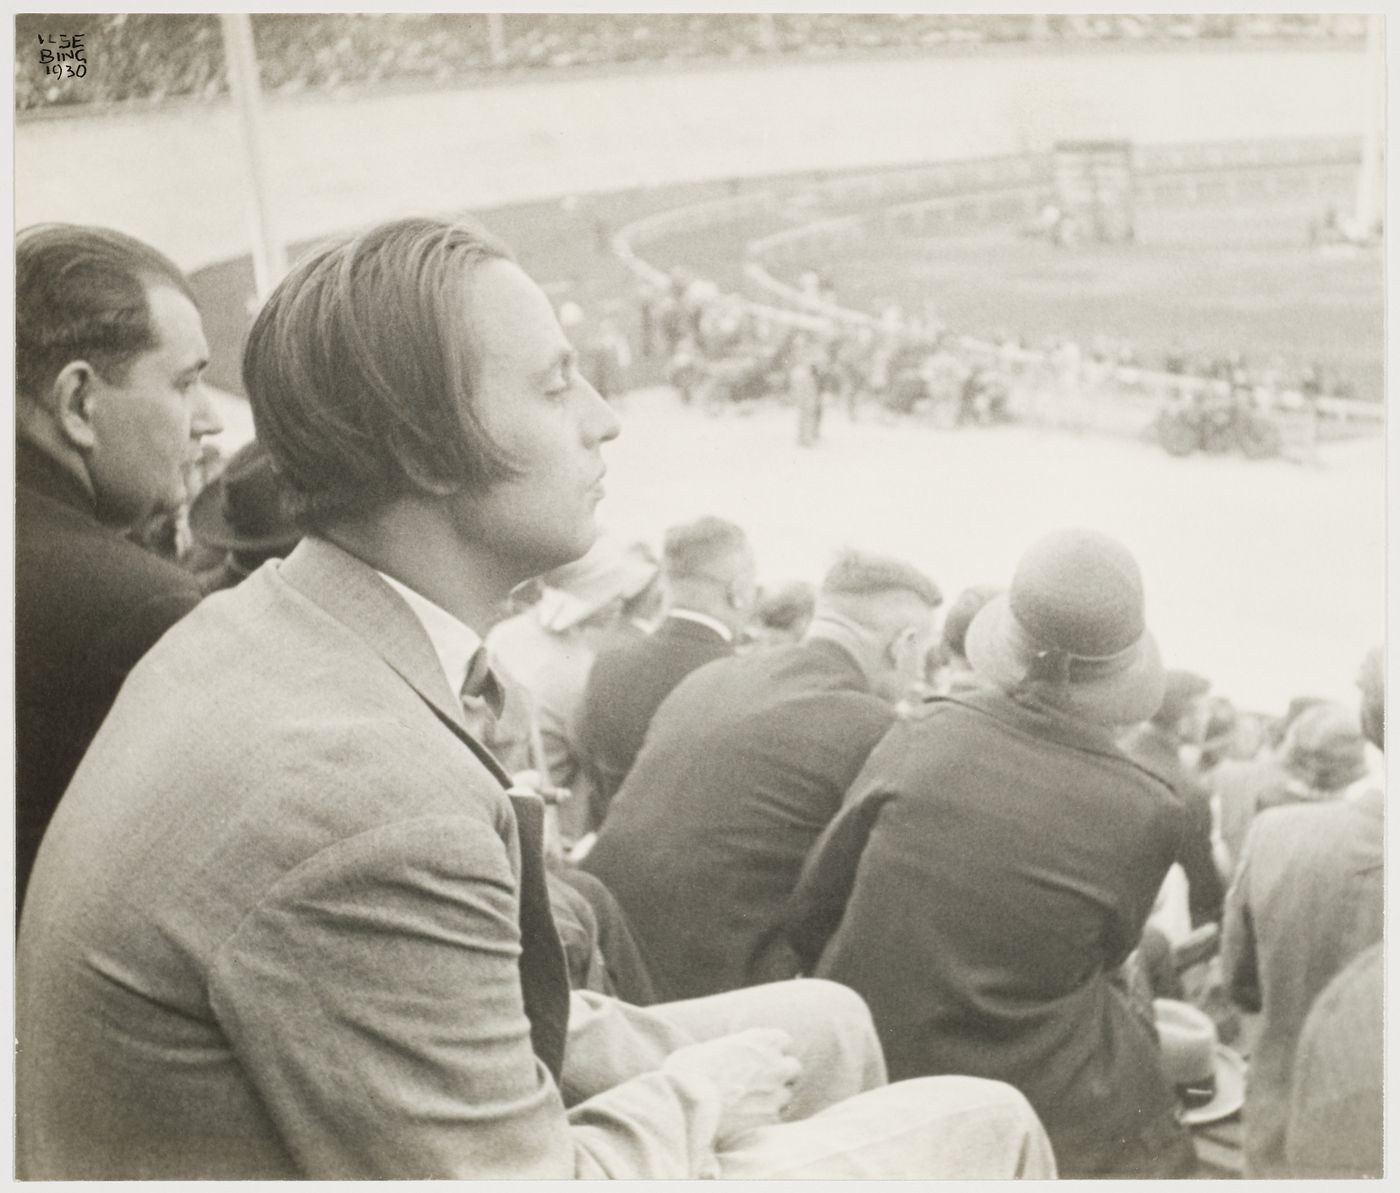 Portrait of Mart Stam sitting in the grandstands at a racetrack, Frankfurt am Main, Germany